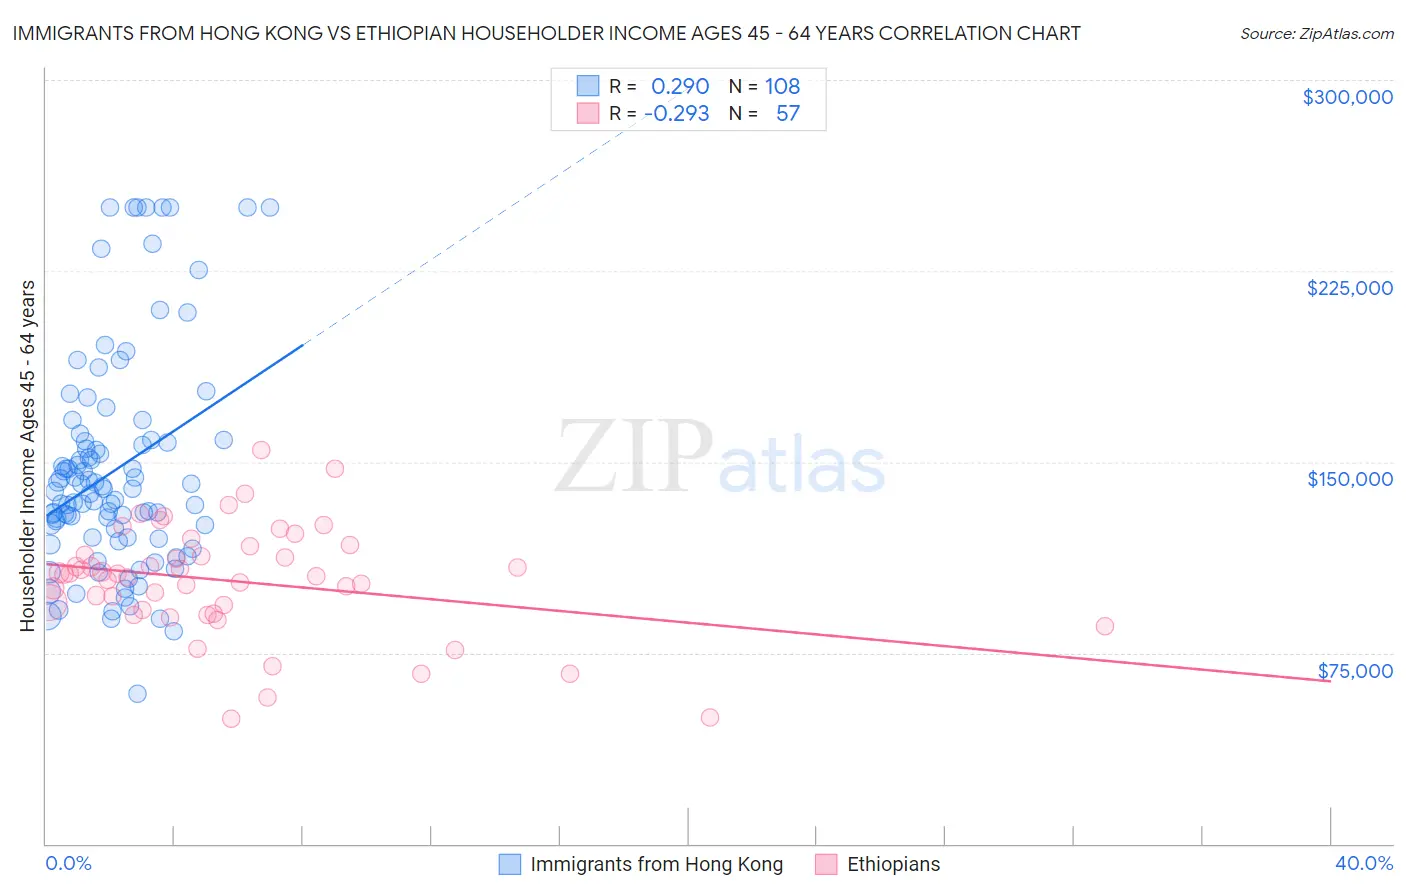 Immigrants from Hong Kong vs Ethiopian Householder Income Ages 45 - 64 years